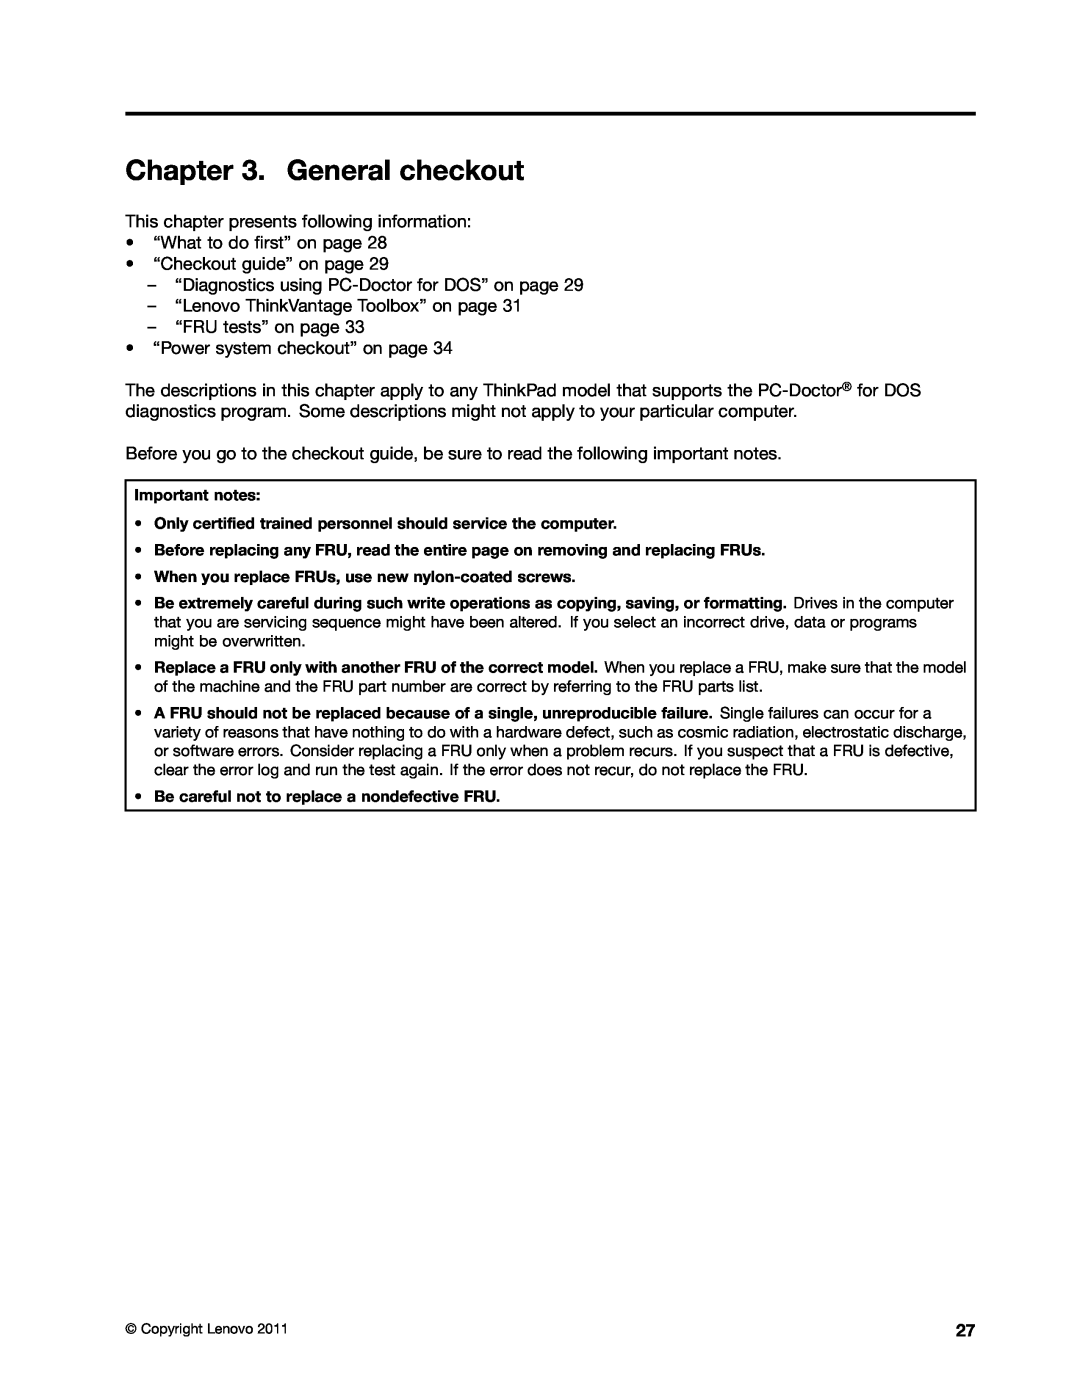 Lenovo T420i General checkout, This chapter presents following information, “Diagnostics using PC-Doctor for DOS” on page 